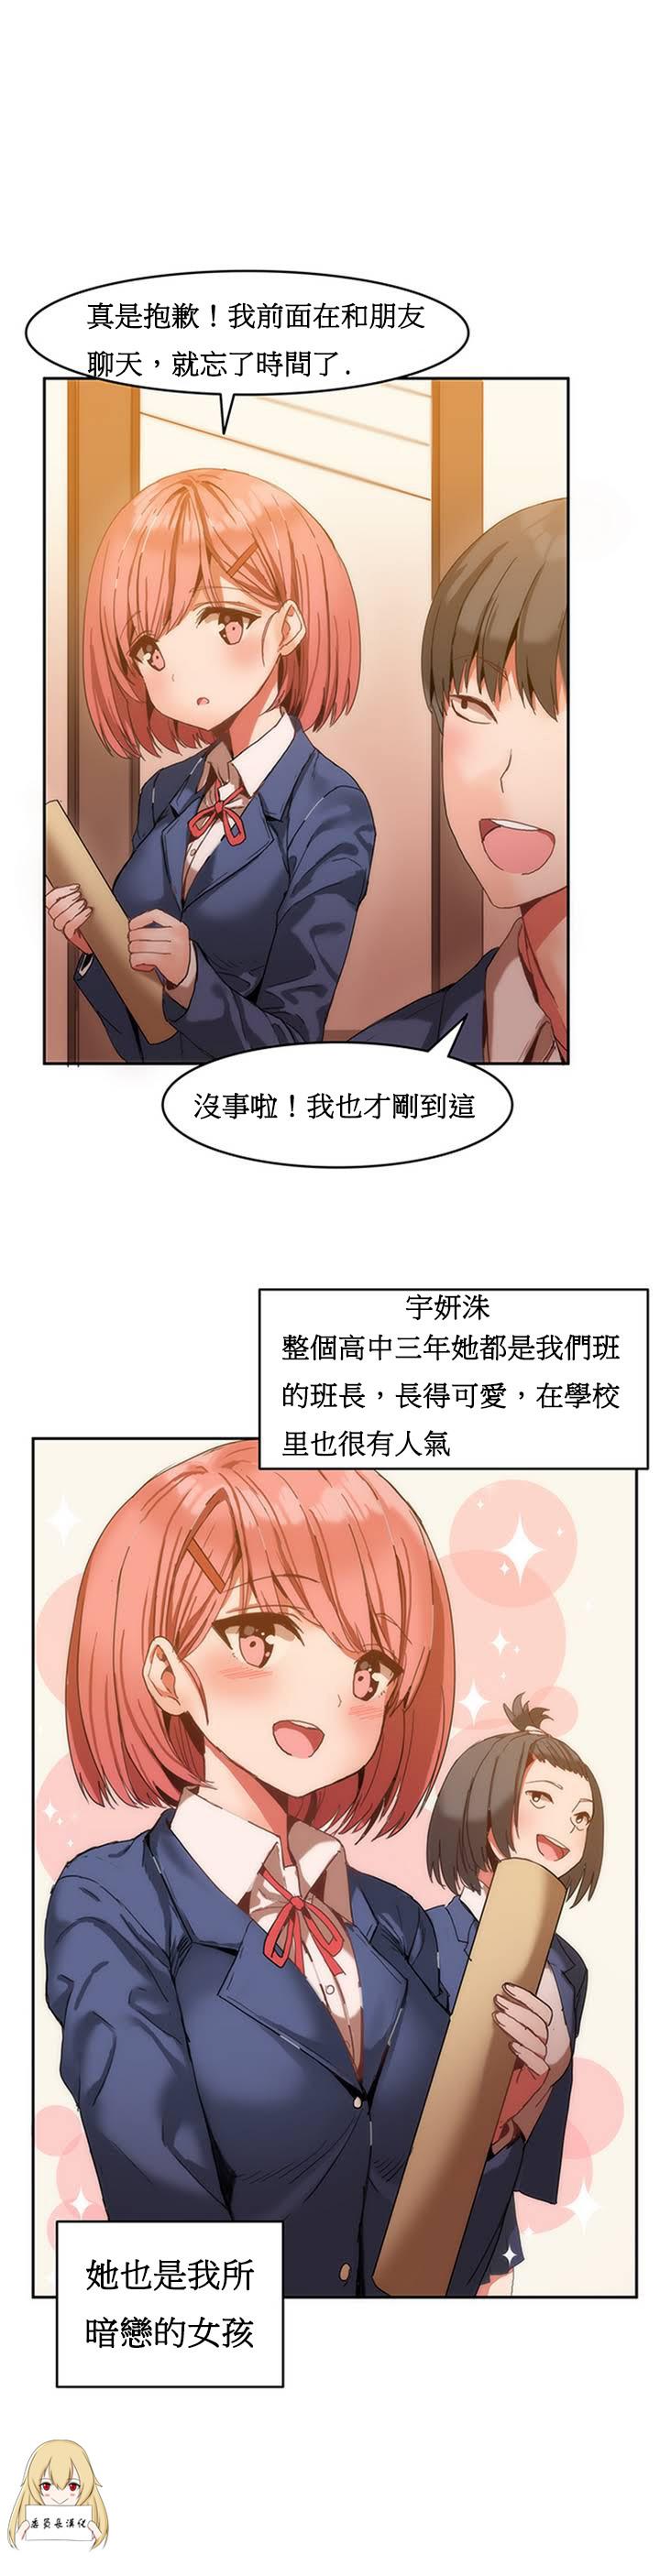 Pornstar Hahri's Lumpy Boardhouse Ch. 1~12【委員長個人漢化】（持續更新） Sex Tape - Page 5